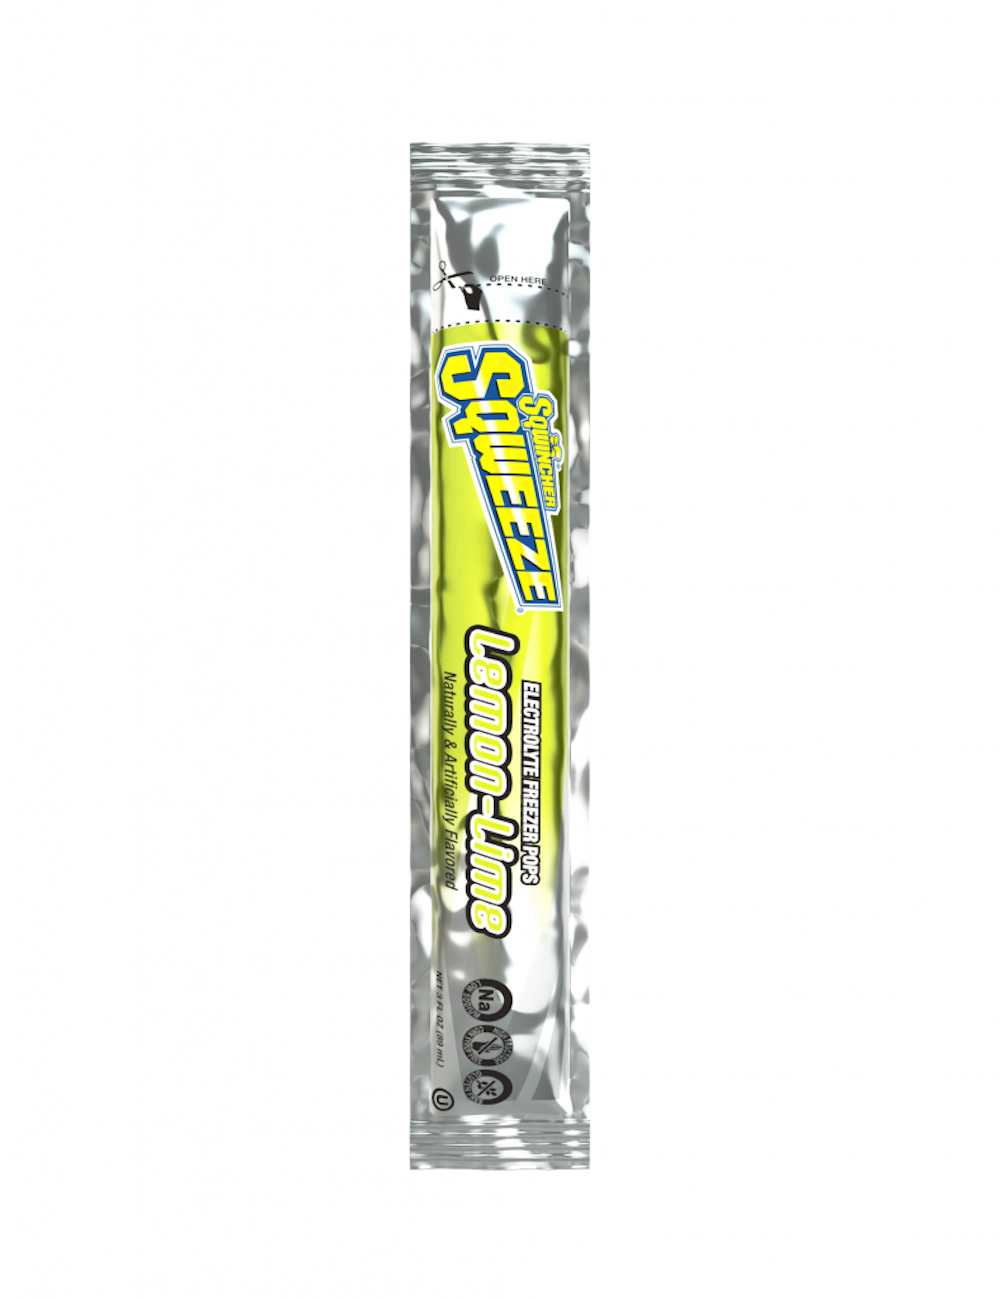 Sqwincher Squeeze Electrolyte Freezer Pops, Assorted Flavors, 3 oz., X352-W7600, Case of 150 (15 Bags)